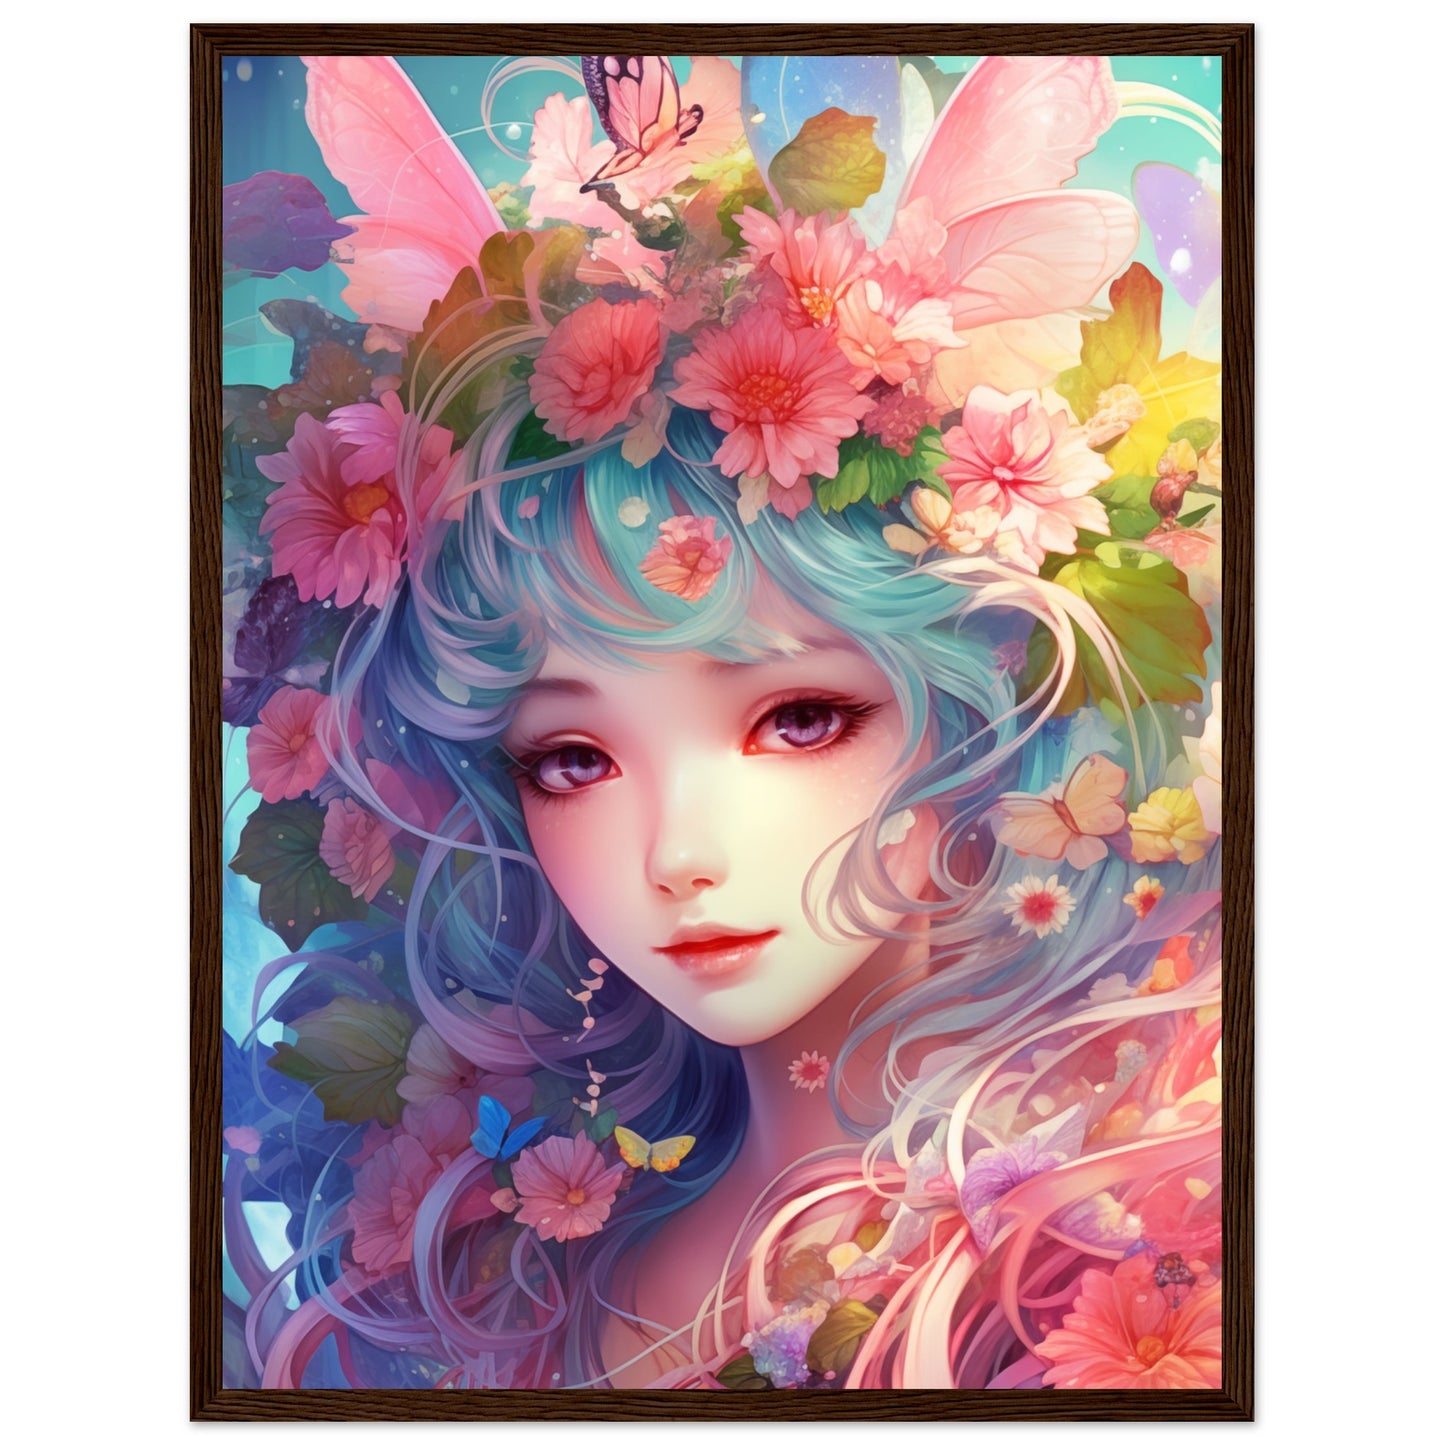 Blue Angel adorned with flowers | Wall art